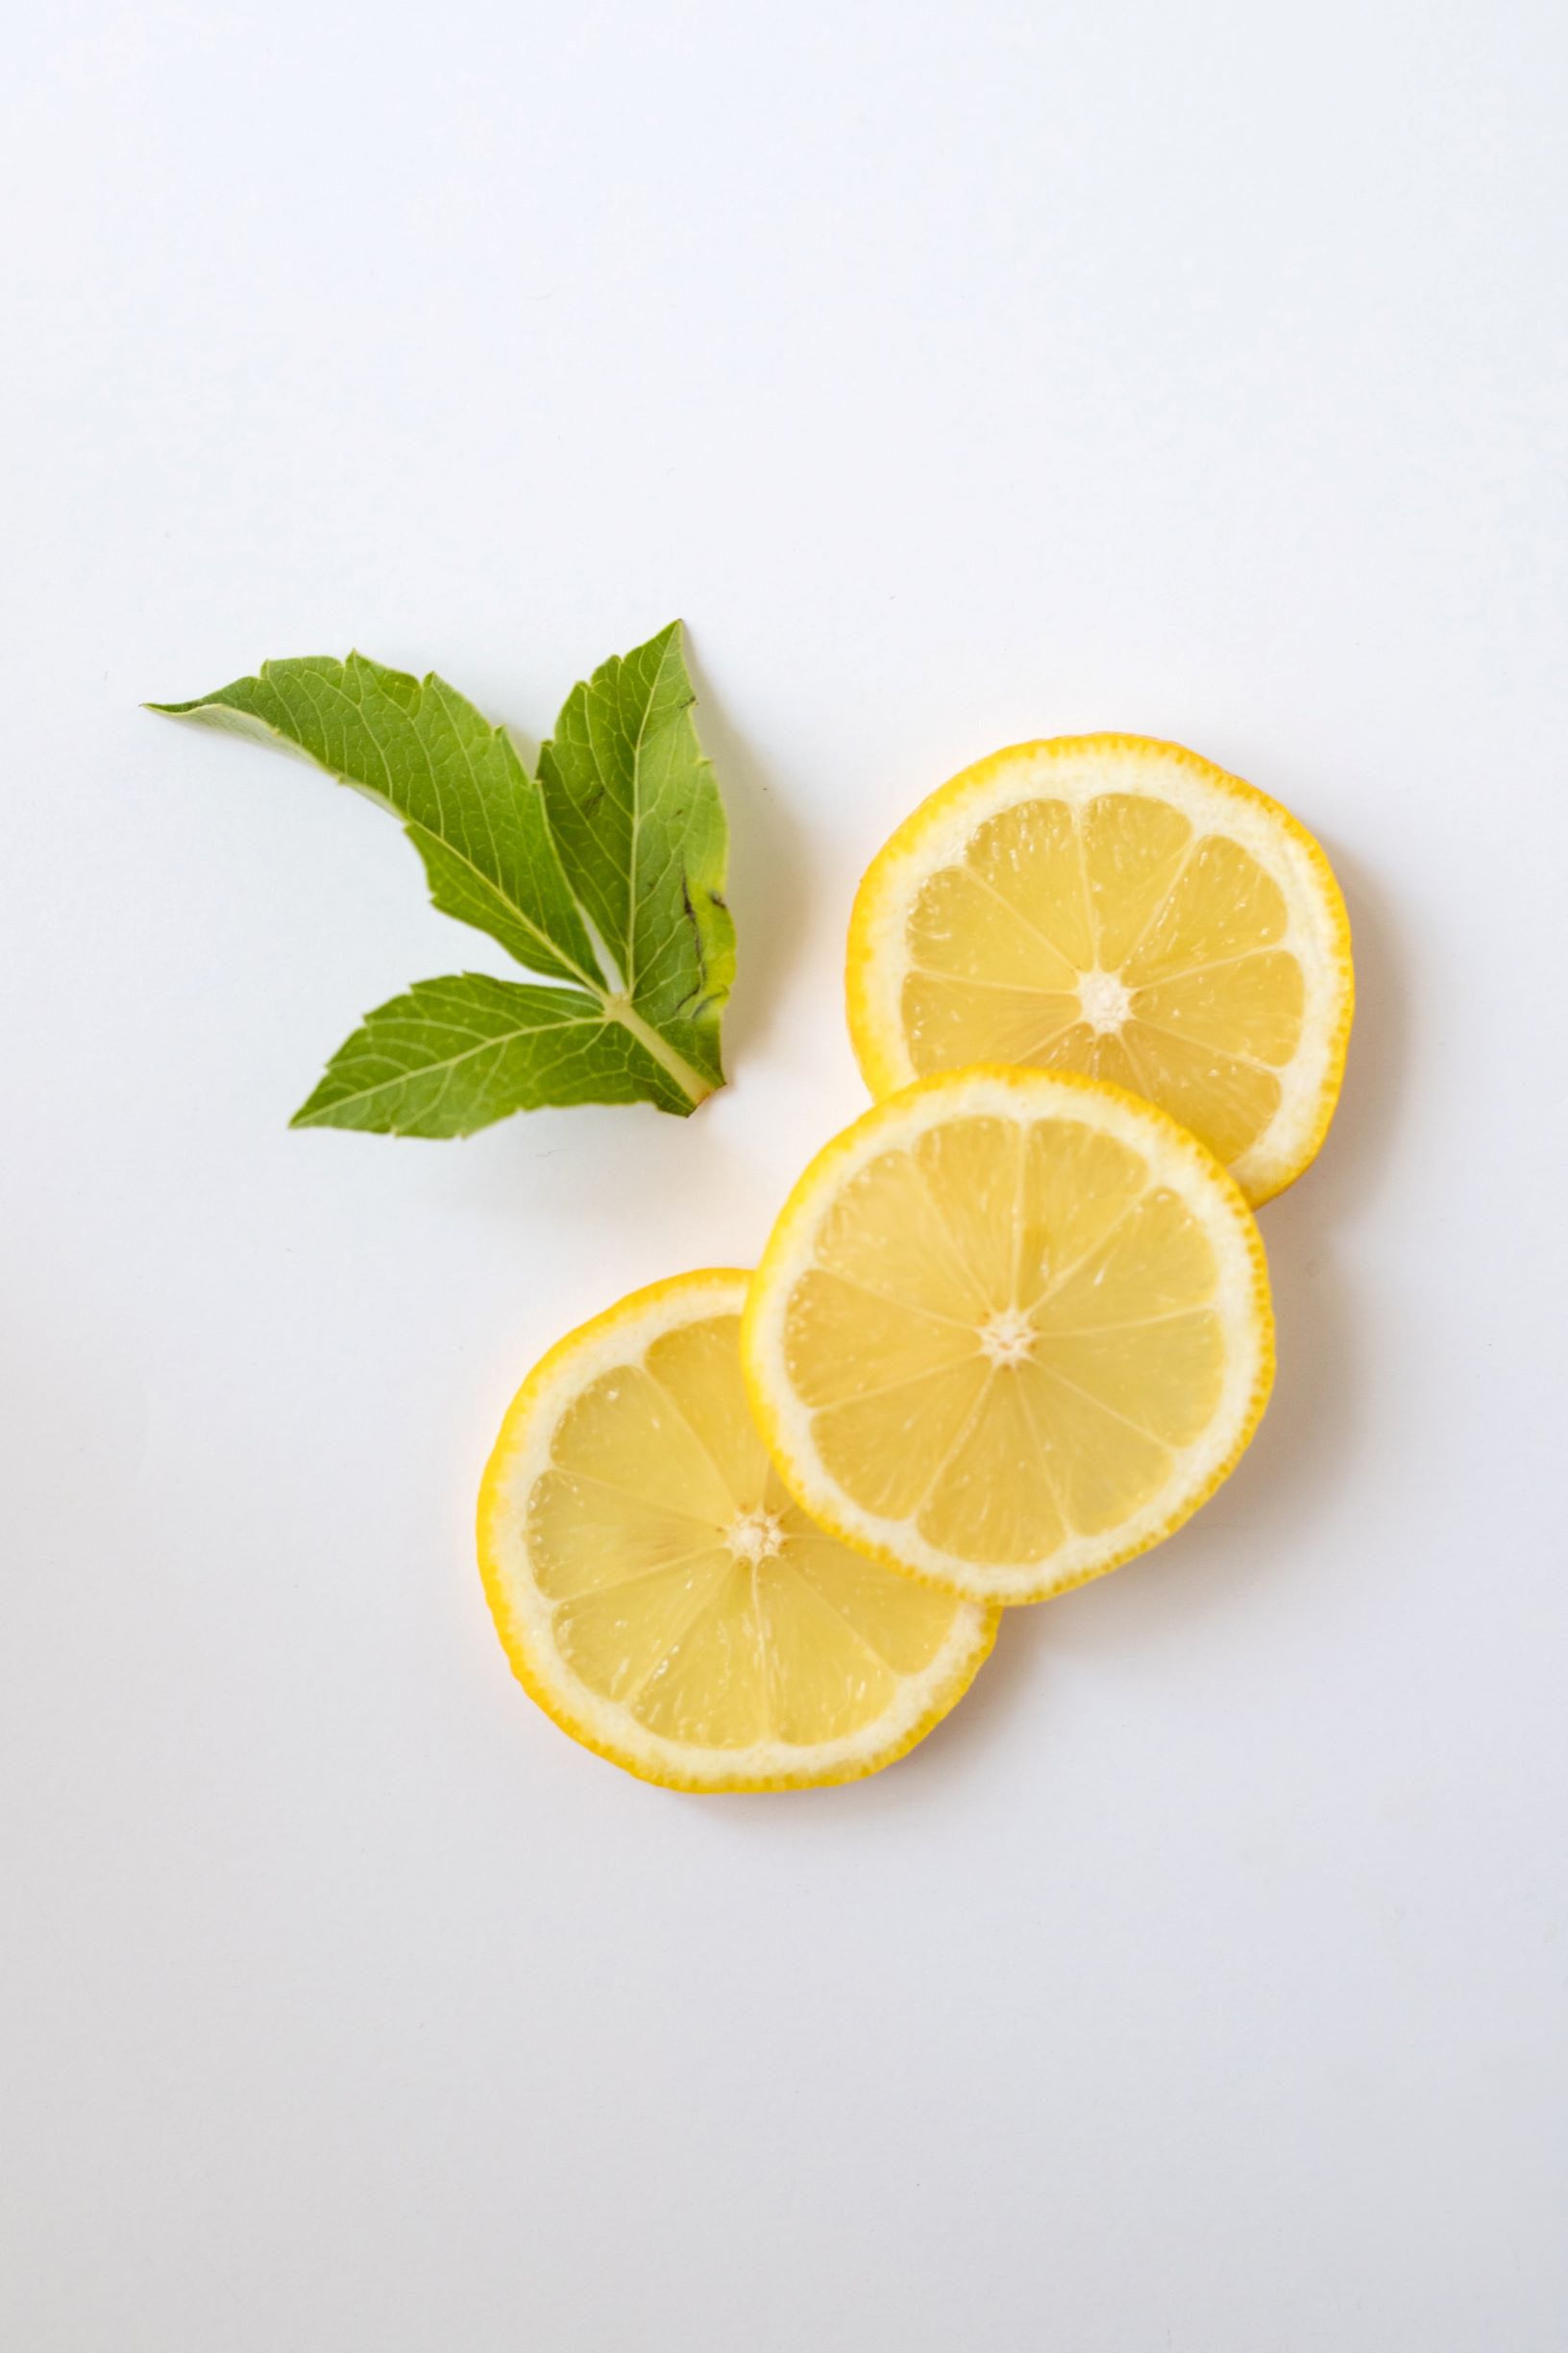 How to make a natural surface cleaner with citrus essential oils